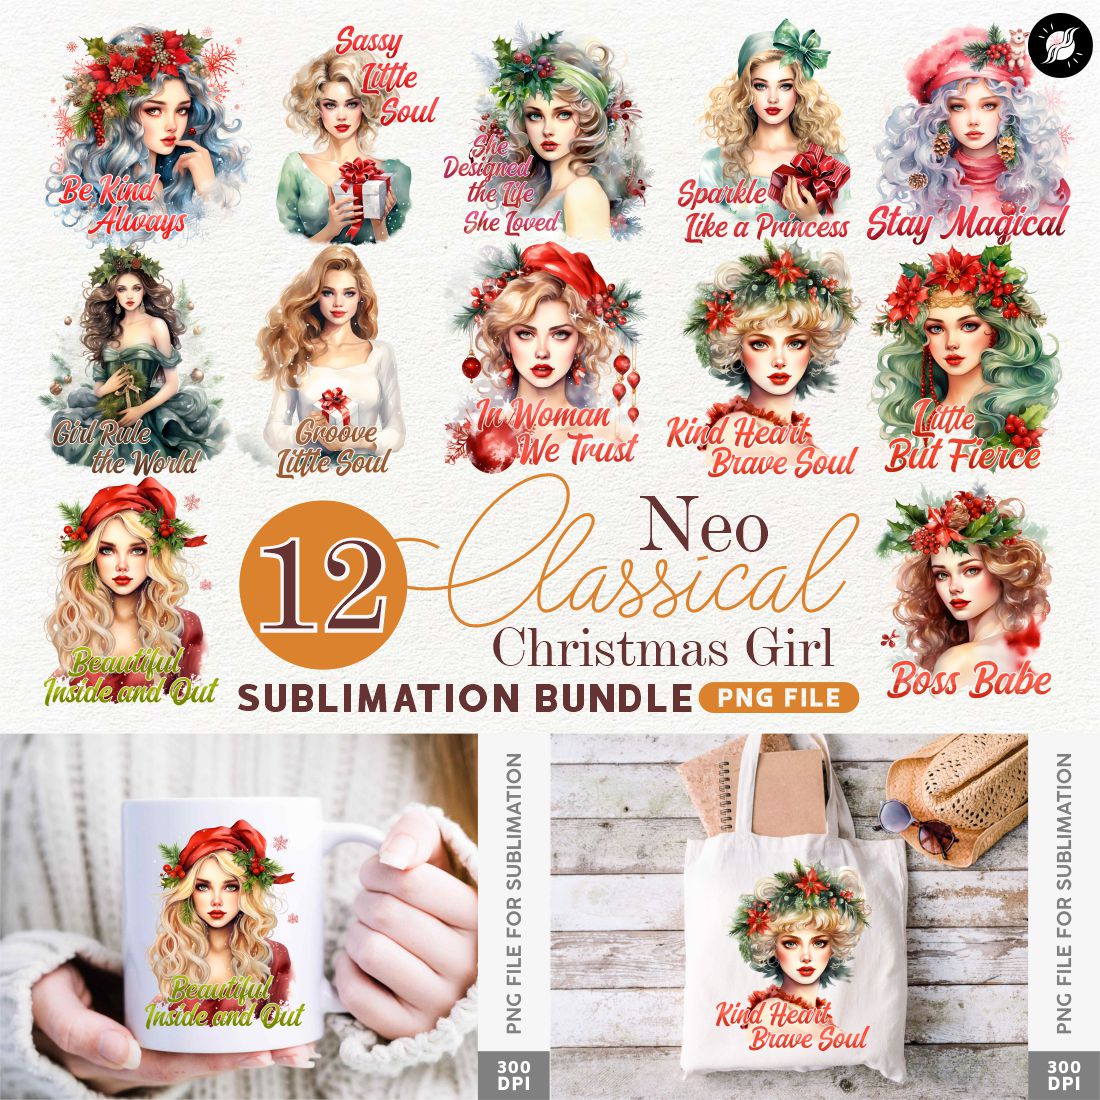 No Classical Christmas Girl Sublimation PNG Bundle preview image.